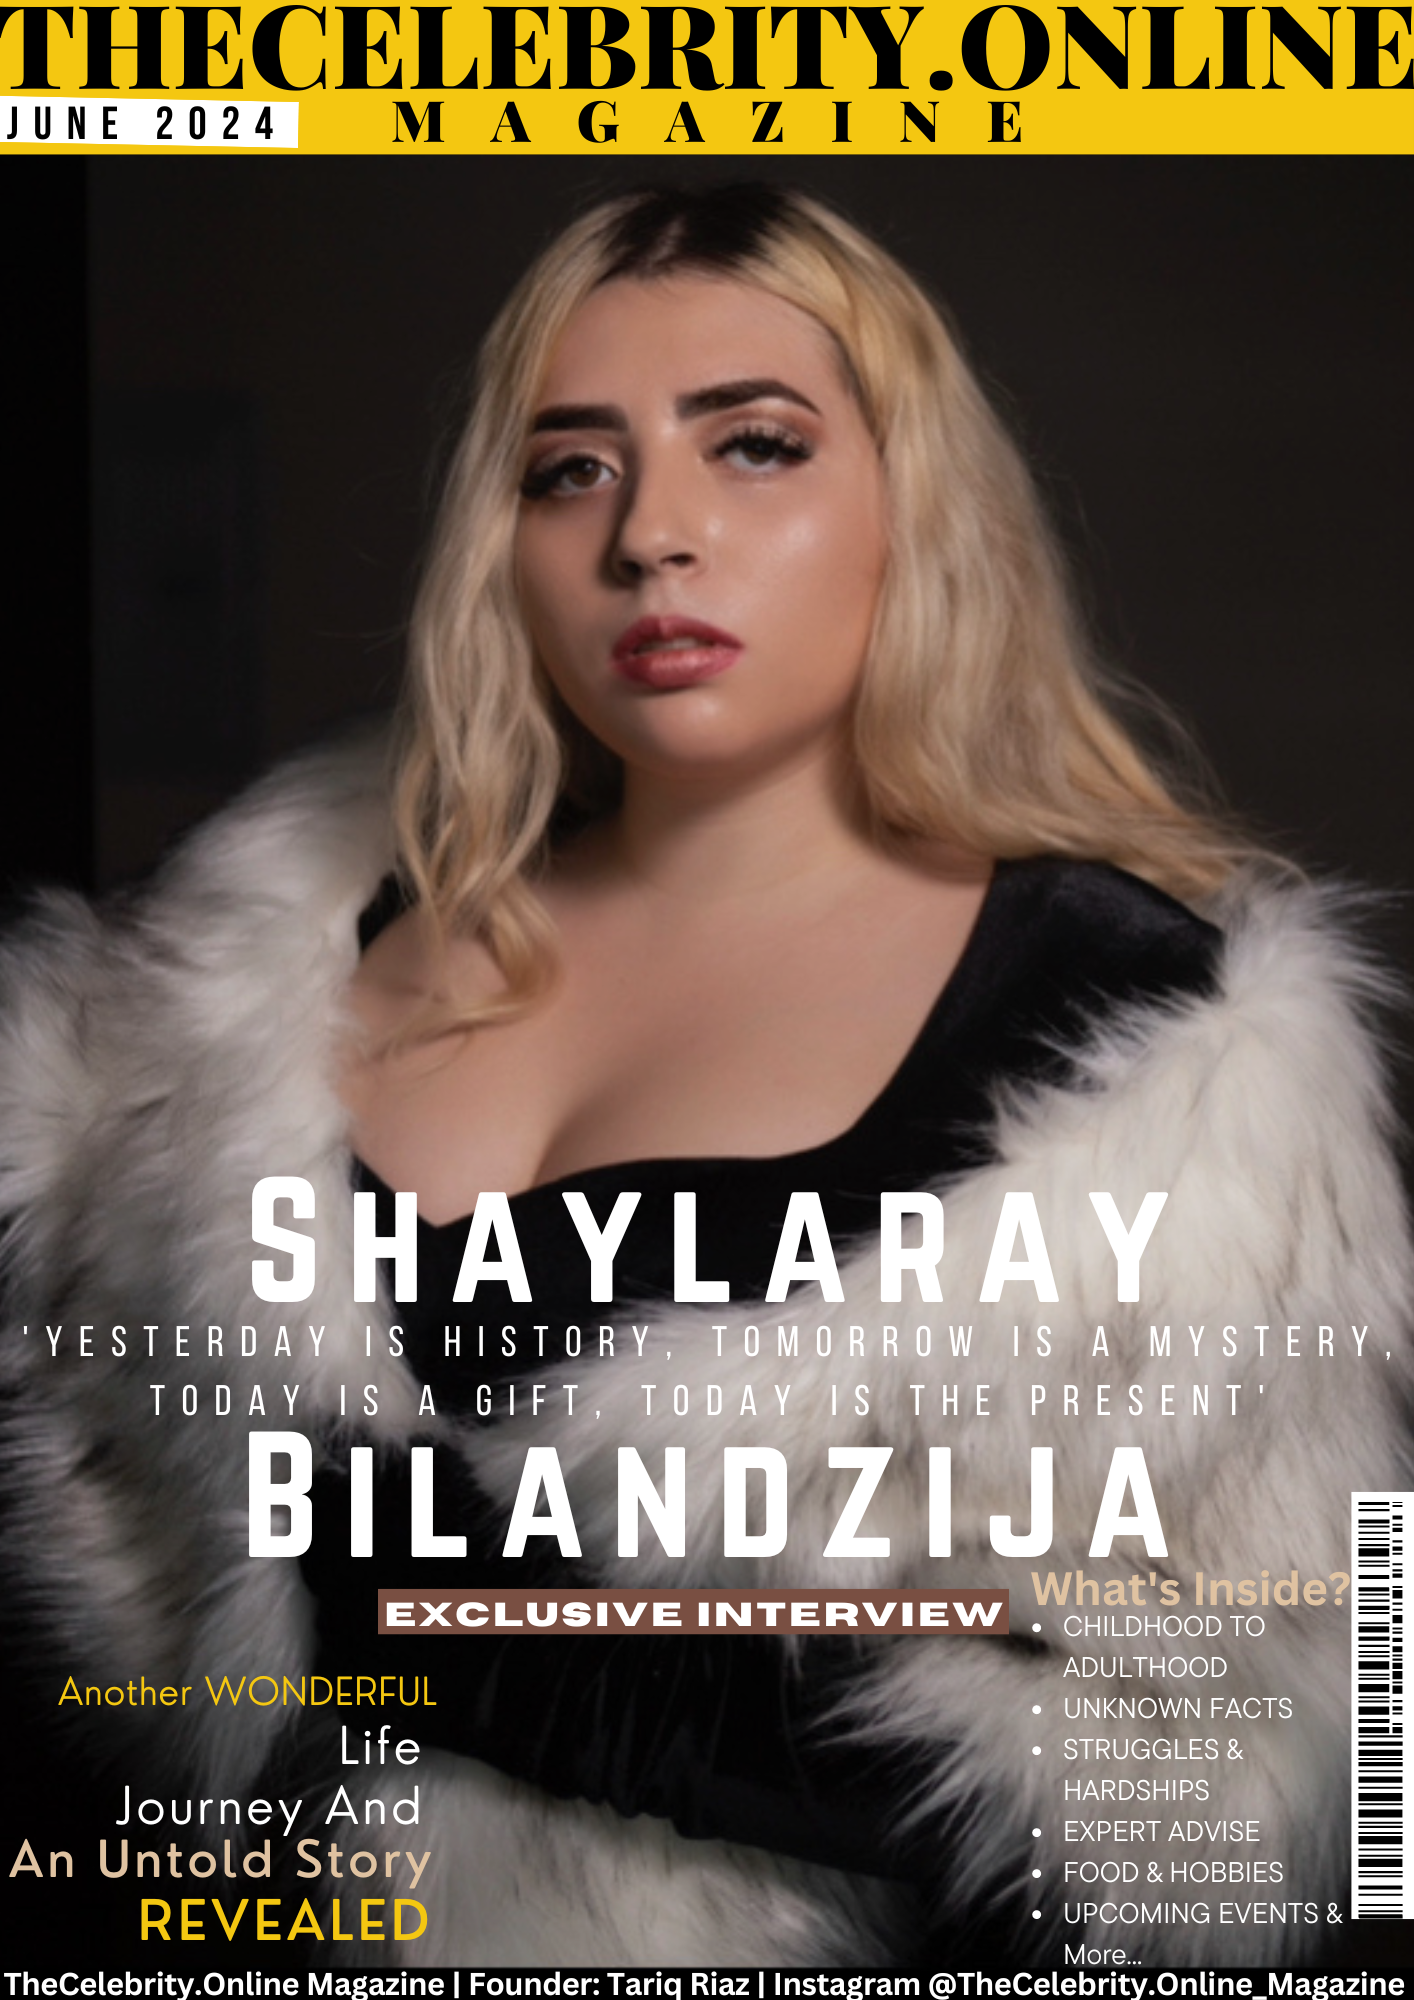 Shaylaray Bilandzija Exclusive Interview – ‘Yesterday is history, tomorrow is a mystery, today is a gift, today is The Present’